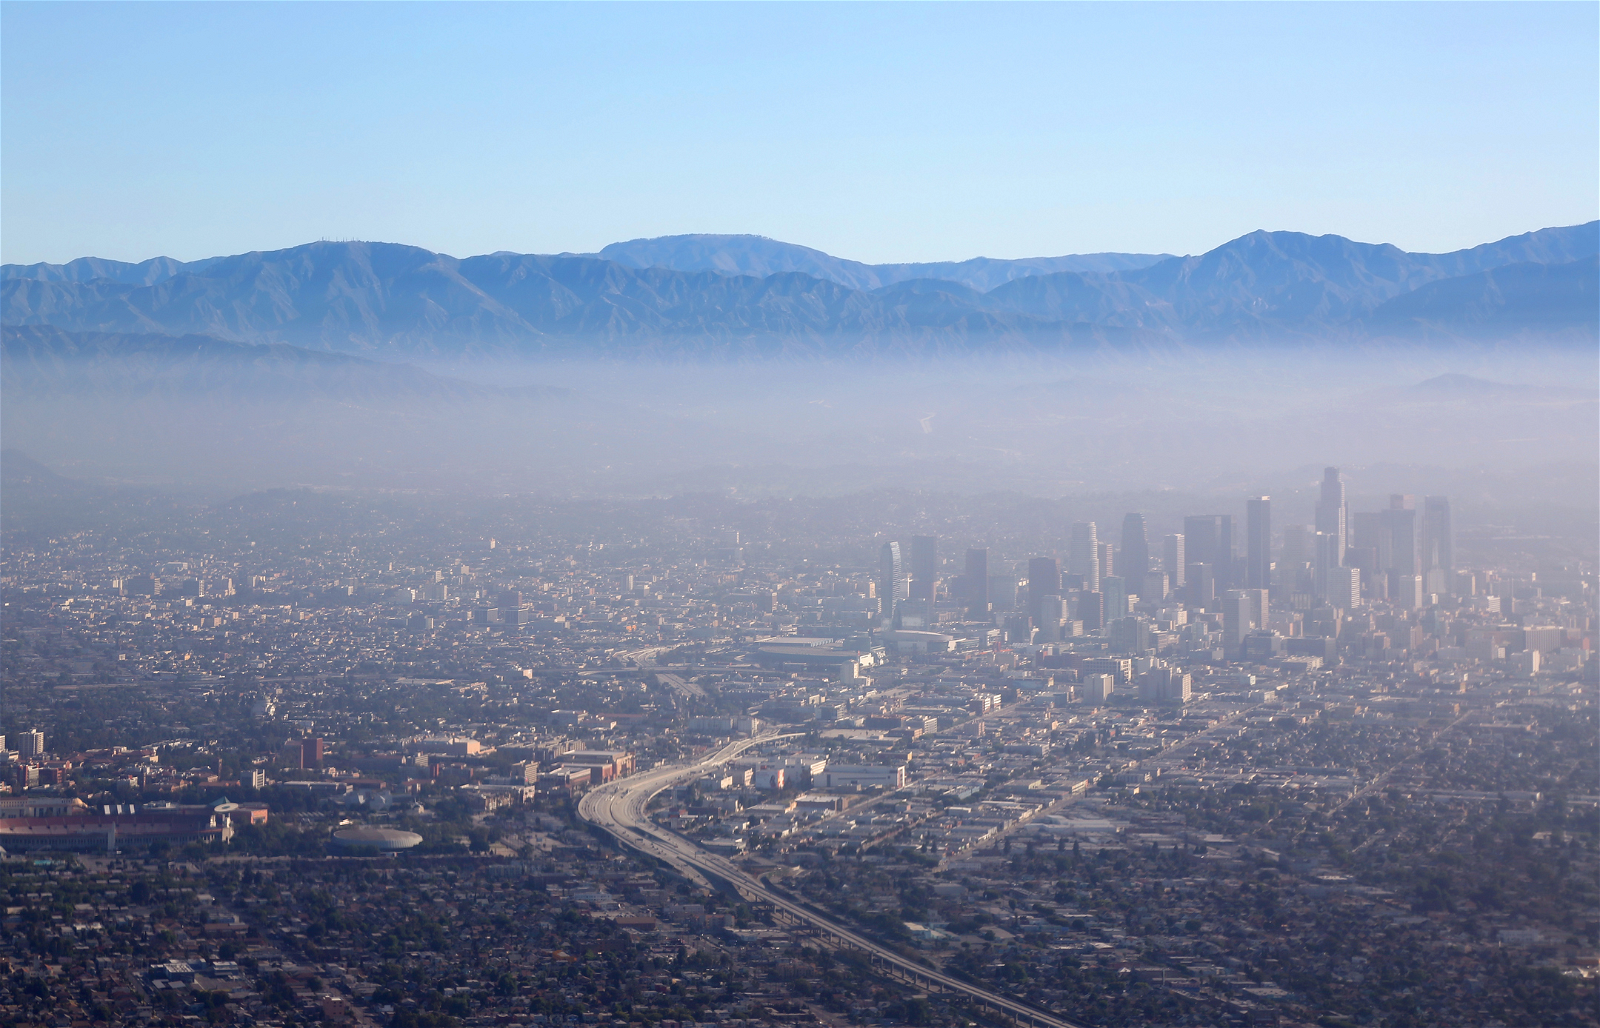 Figure 1: Smog hovers over downtown Los Angeles. Source: Getty